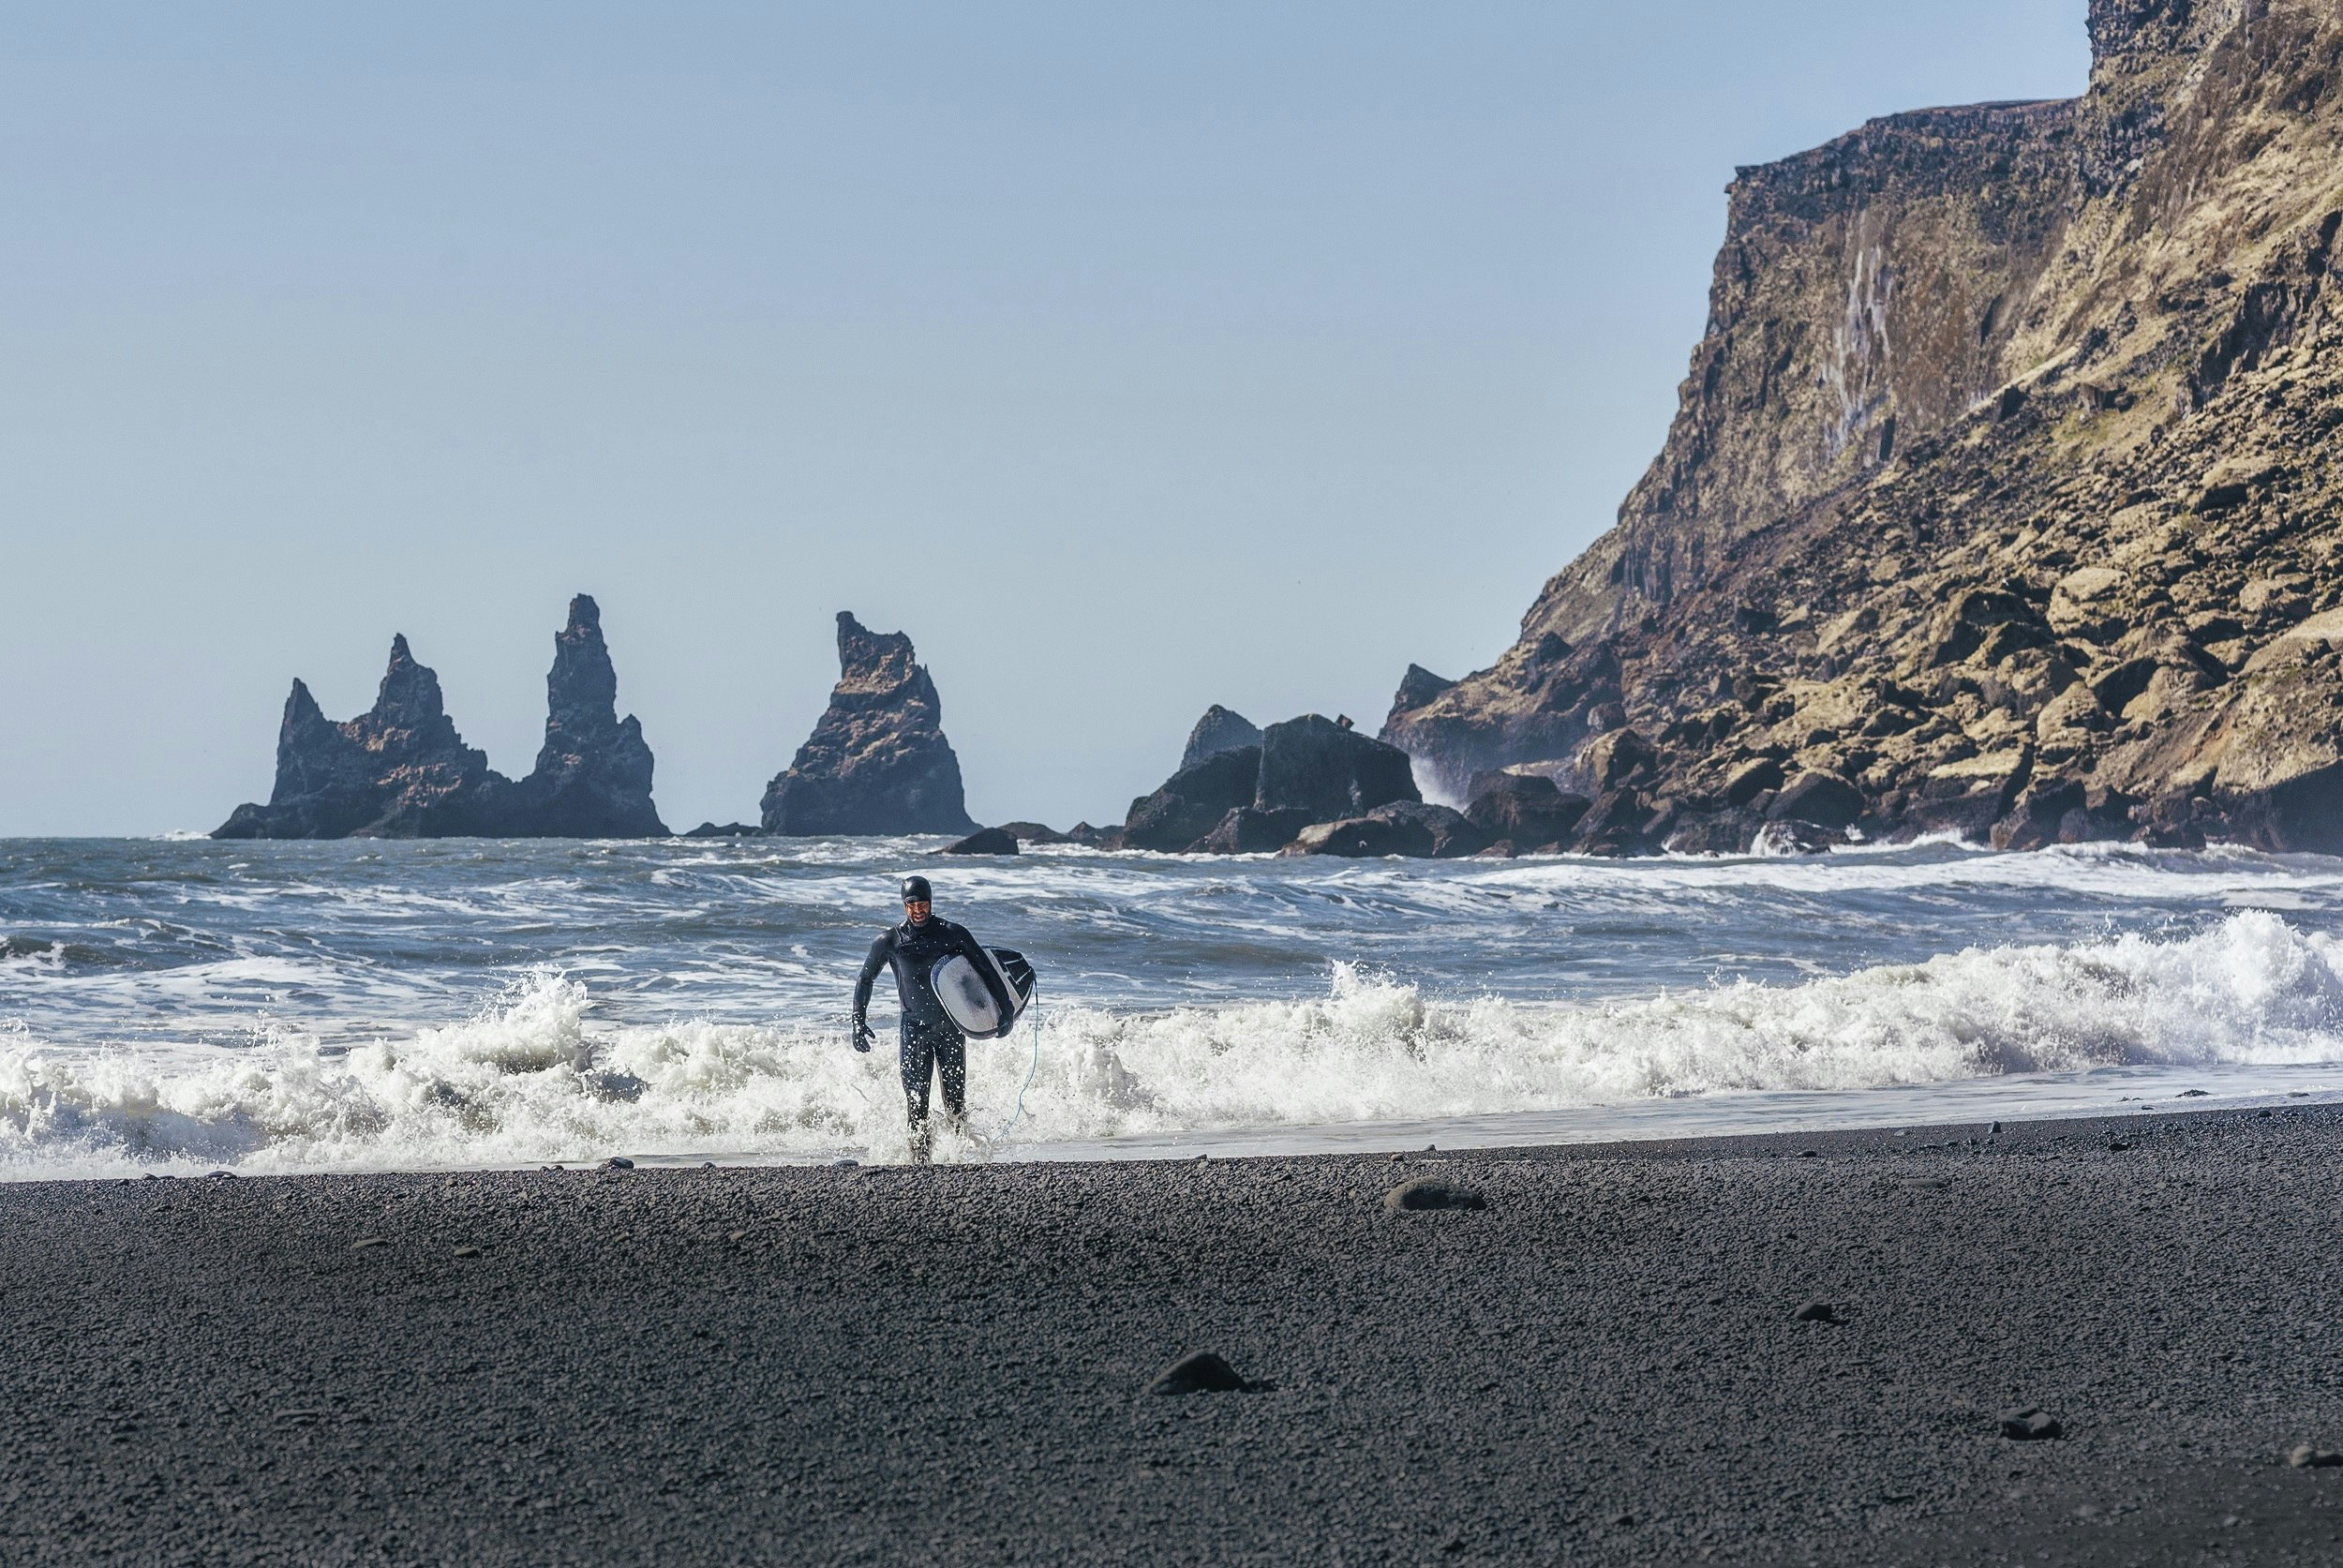 A surfer walks out of the surf and onto a black beach with his board in hand; in the background are several jagged islands bursting from the sea.